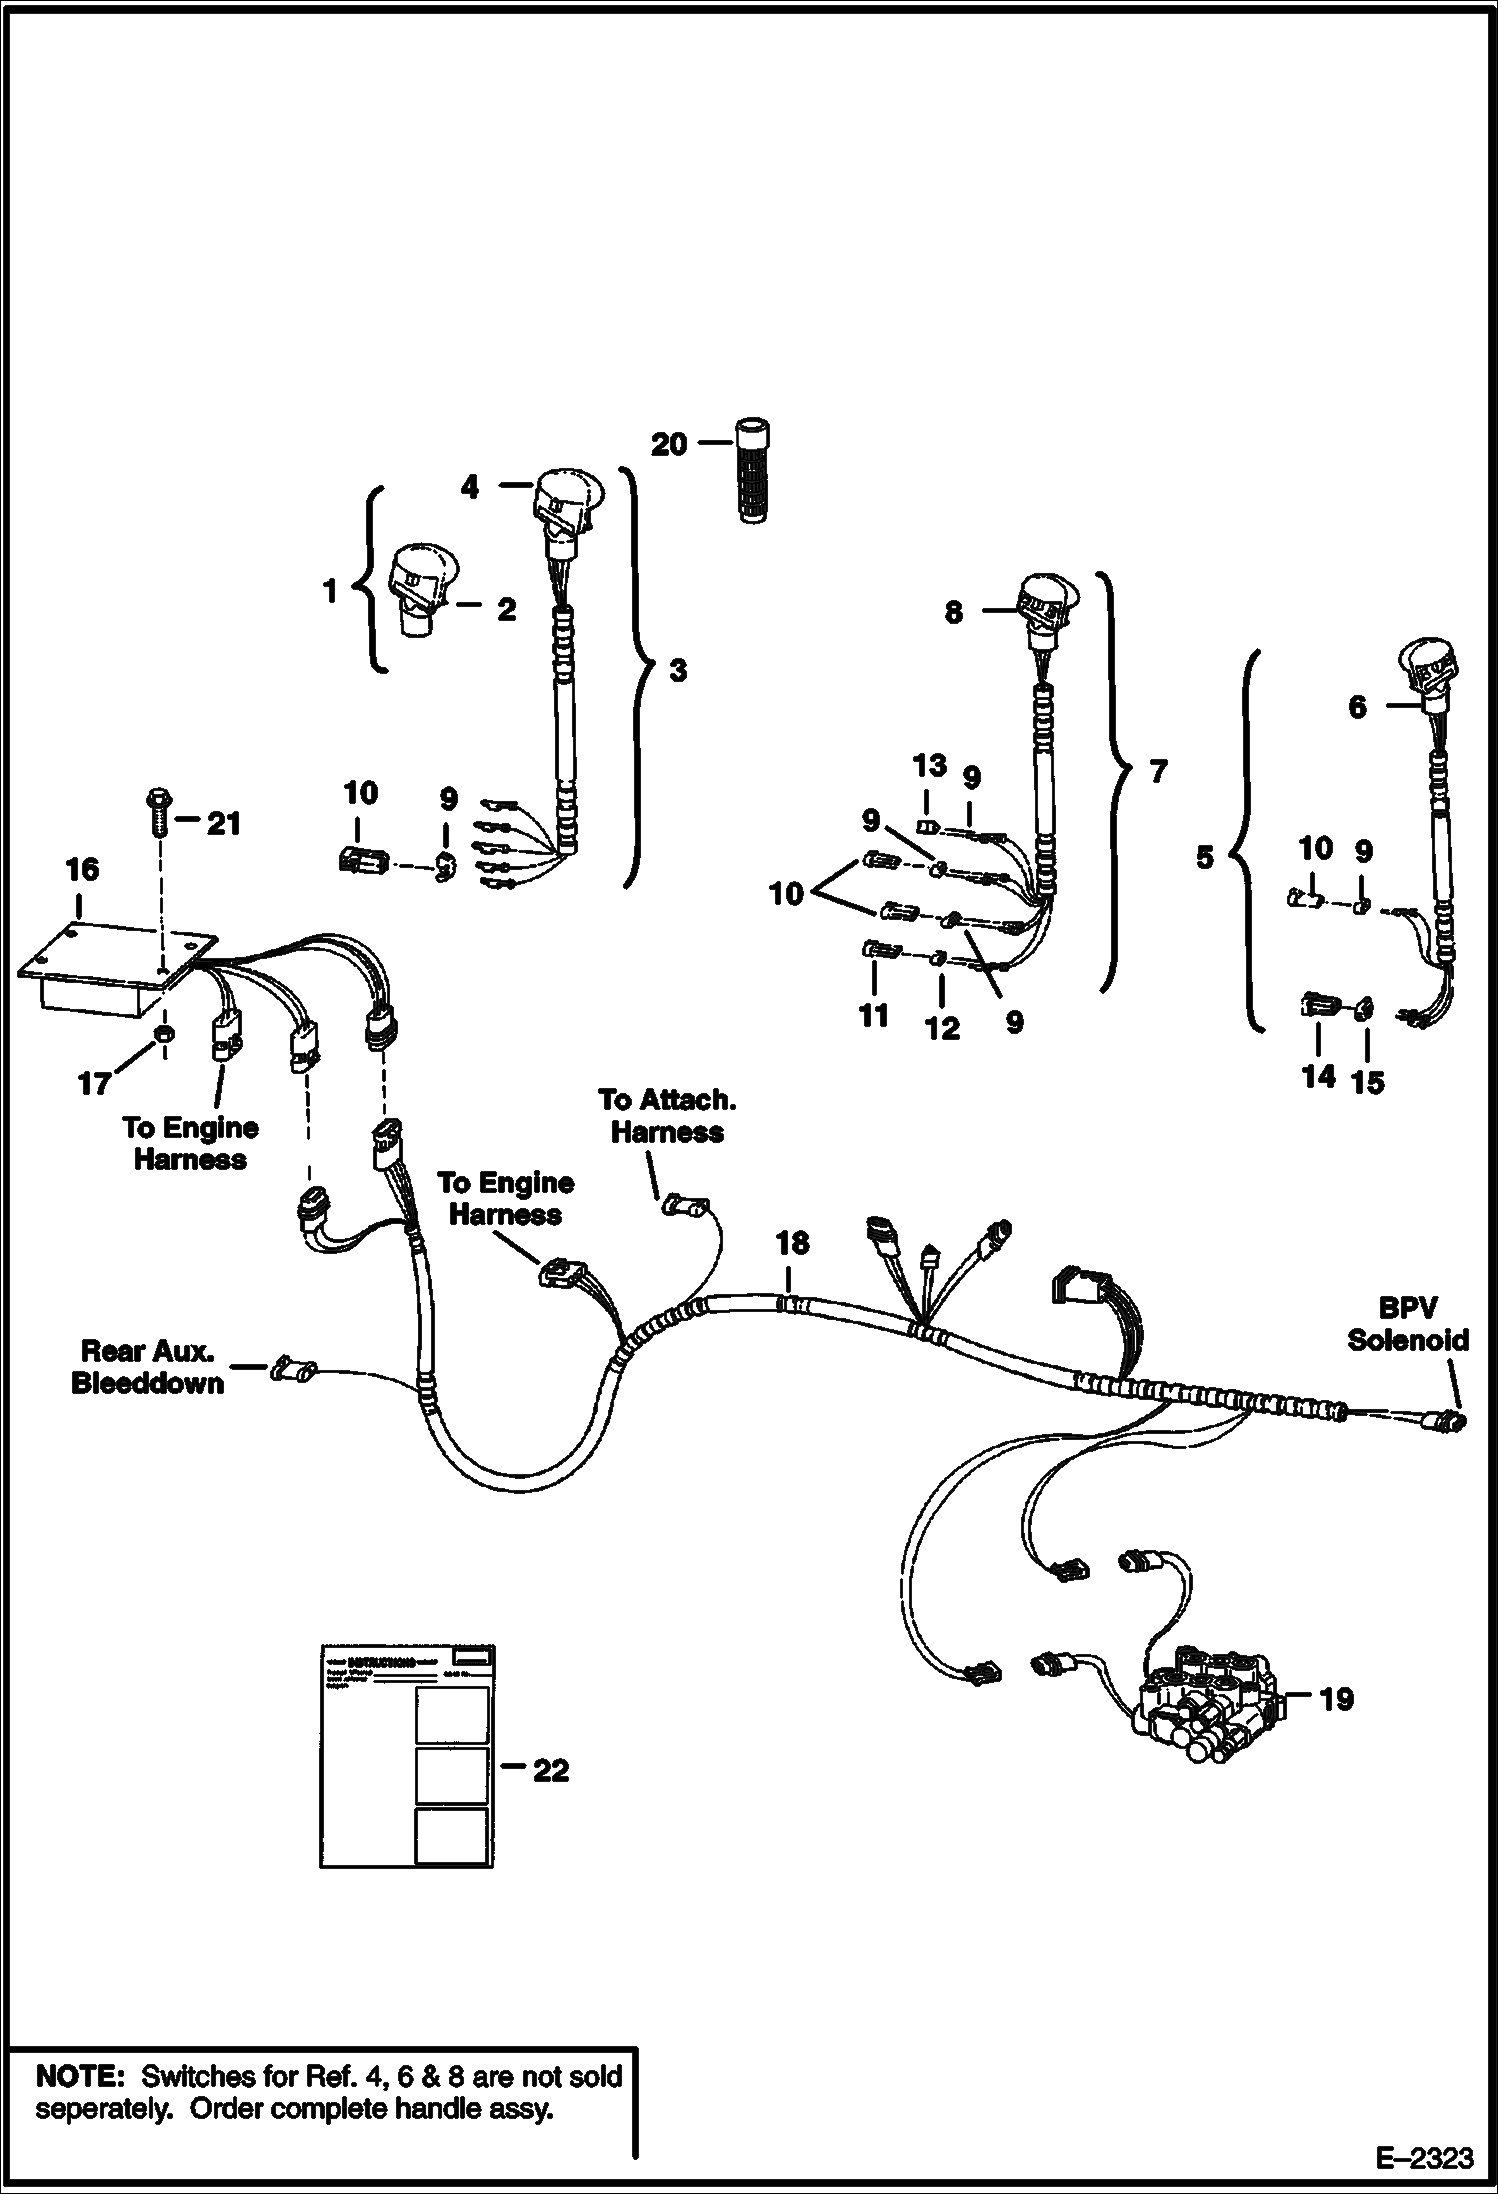 Схема запчастей Bobcat 800s - ELECTRICAL CONTROLS CIRCUITRY (For Proportional Auxiliaries) (S/N 5141 11443-39999, 5142 11105-39999) ELECTRICAL SYSTEM